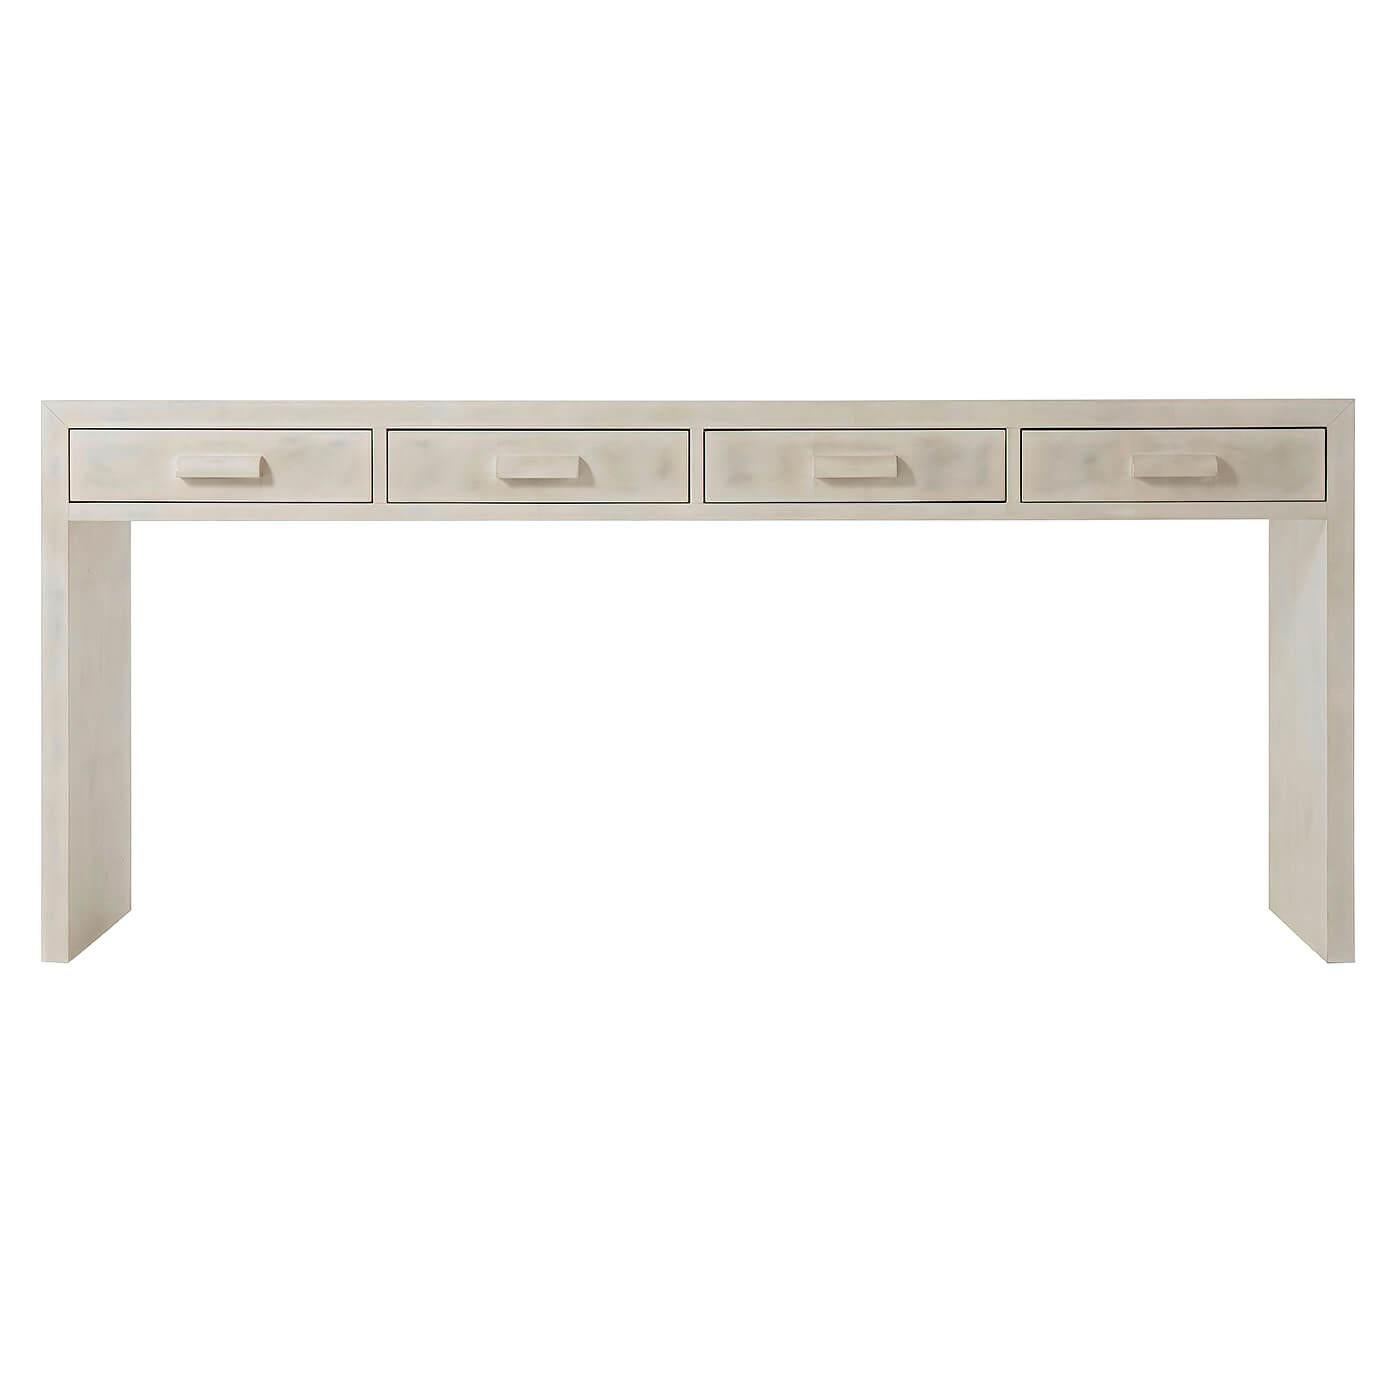 Modern hand-painted faux parchment console table with four drawers having soft closing mechanisms, on waterfall trestle ends.

Dimensions: 70